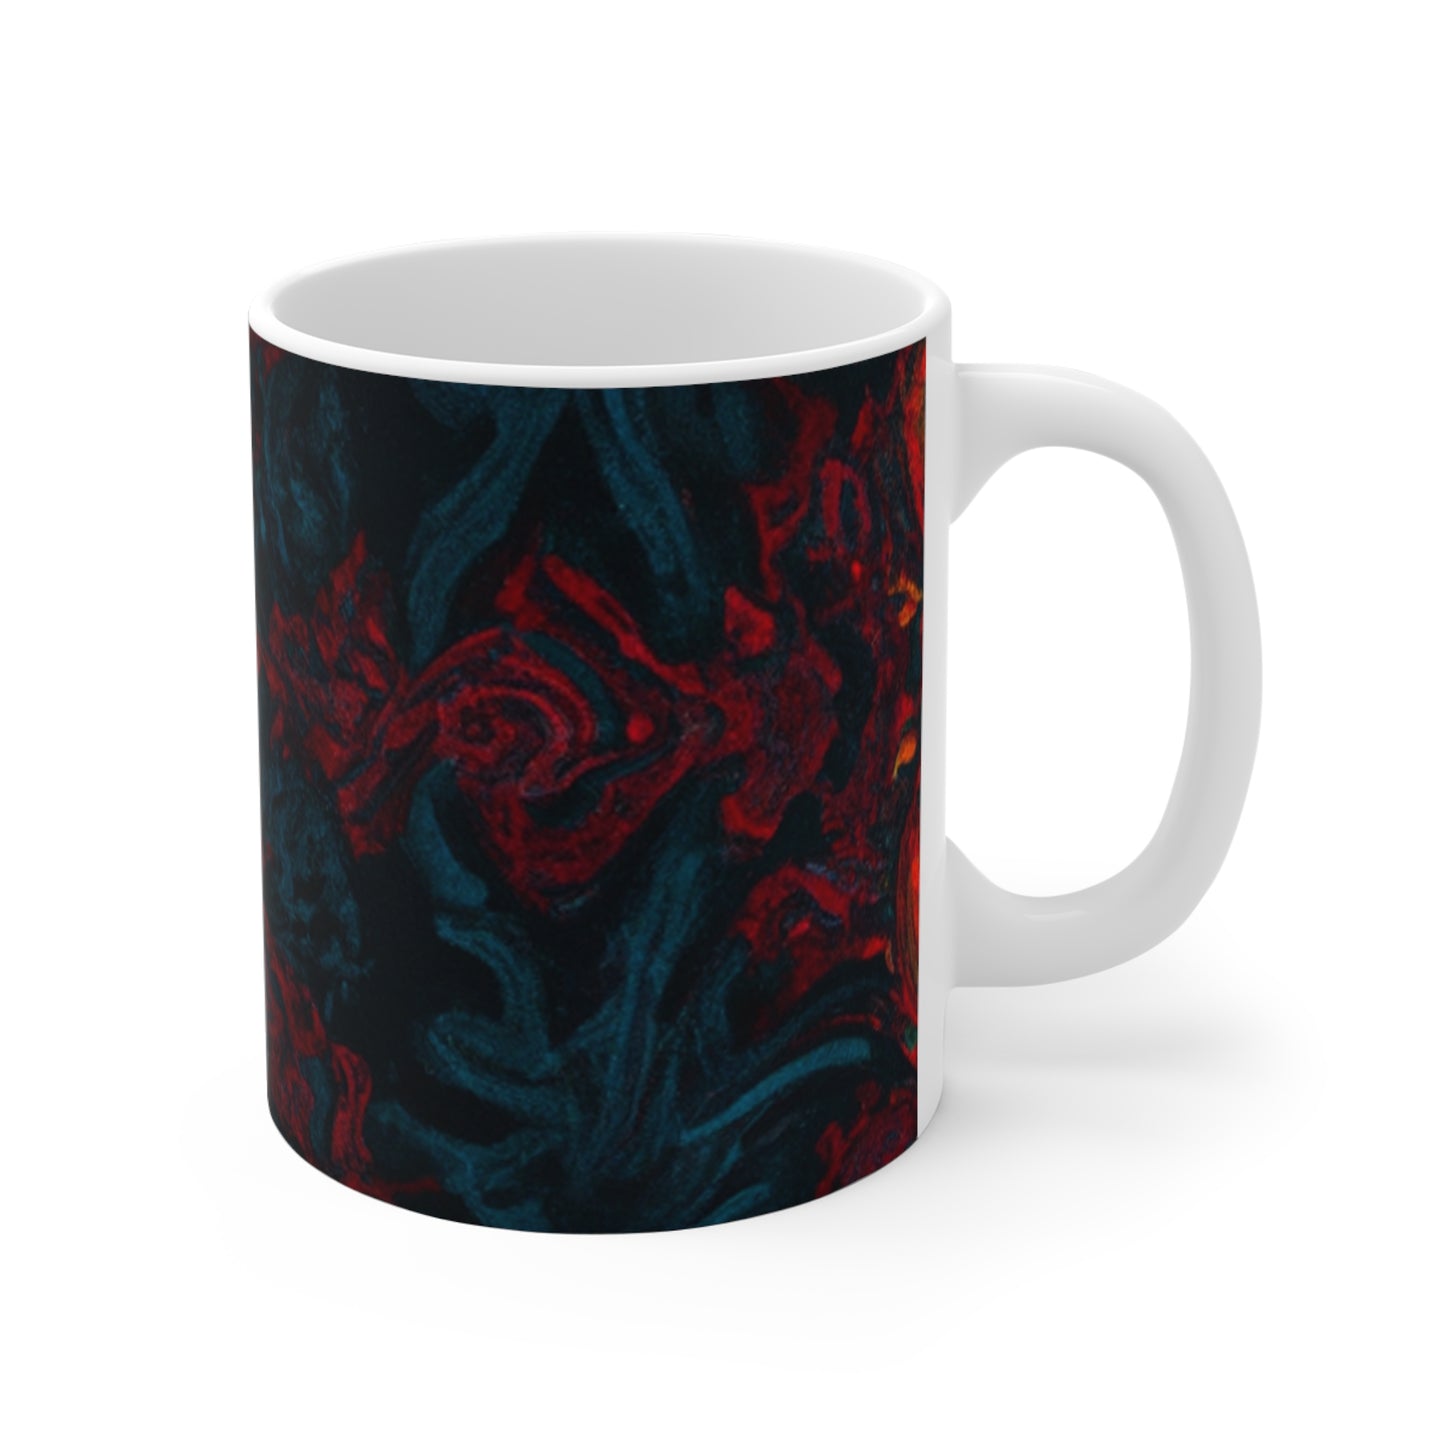 Walter's Coffee Roasters - Psychedelic Coffee Cup Mug 11 Ounce